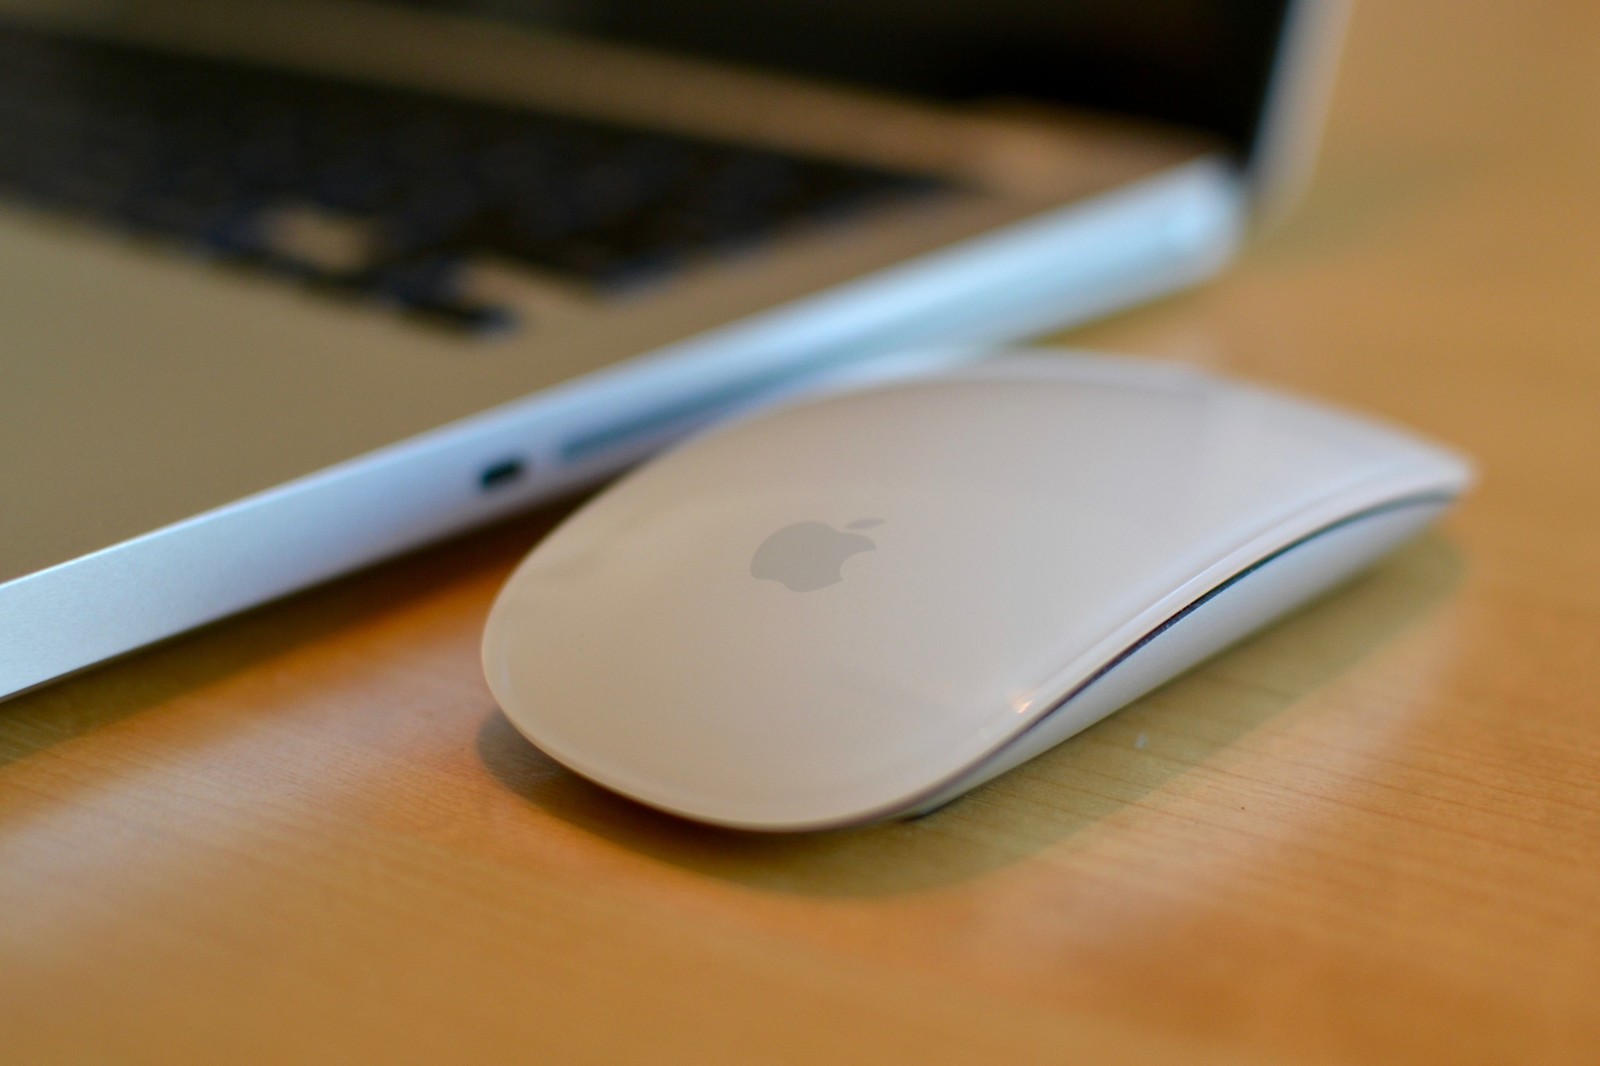 Best Gamimg Mice For Mac